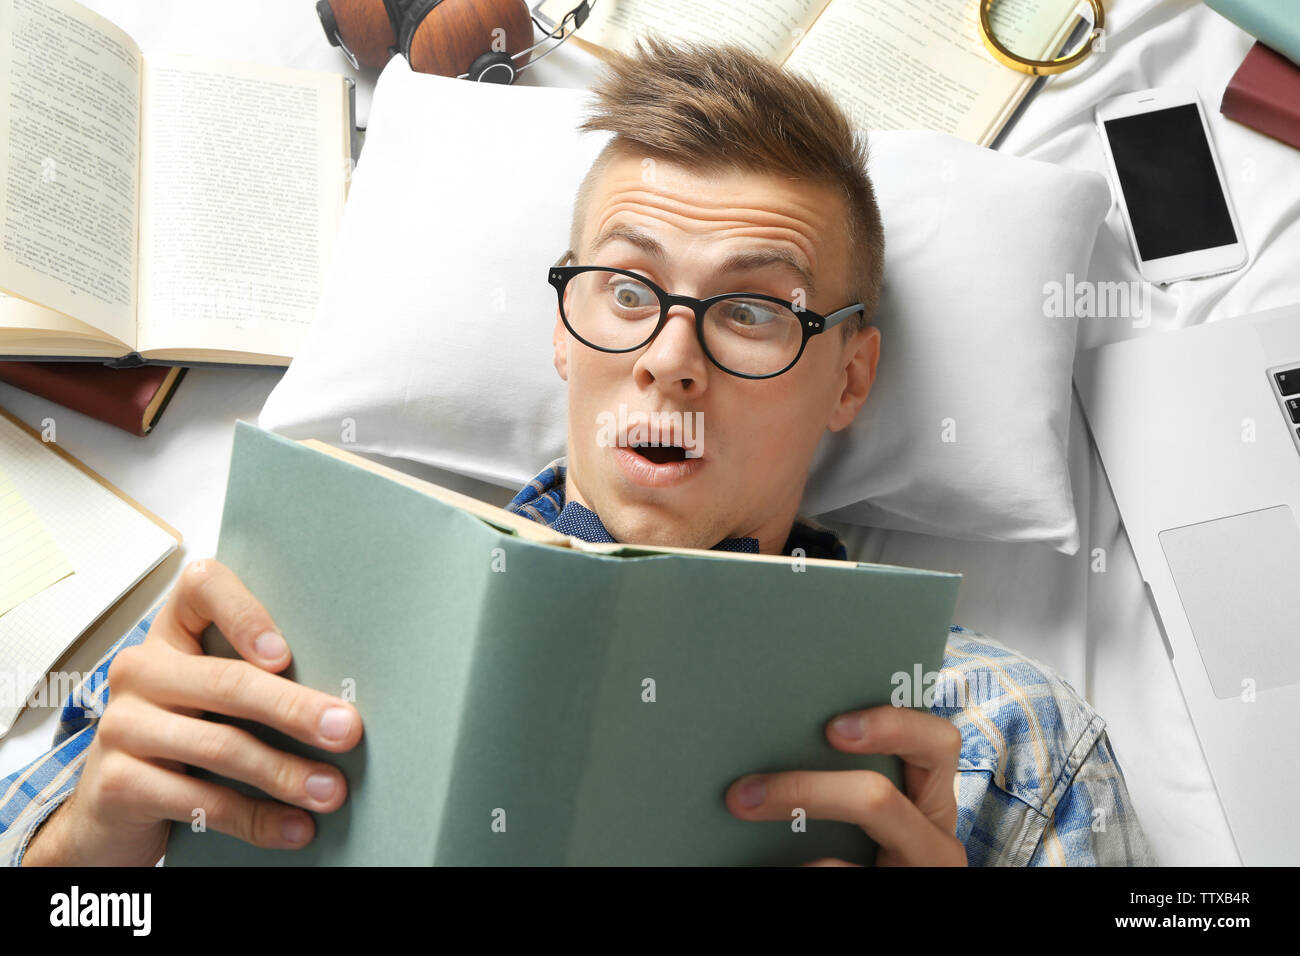 Funny young man reading book while lying on bed Stock Photo - Alamy